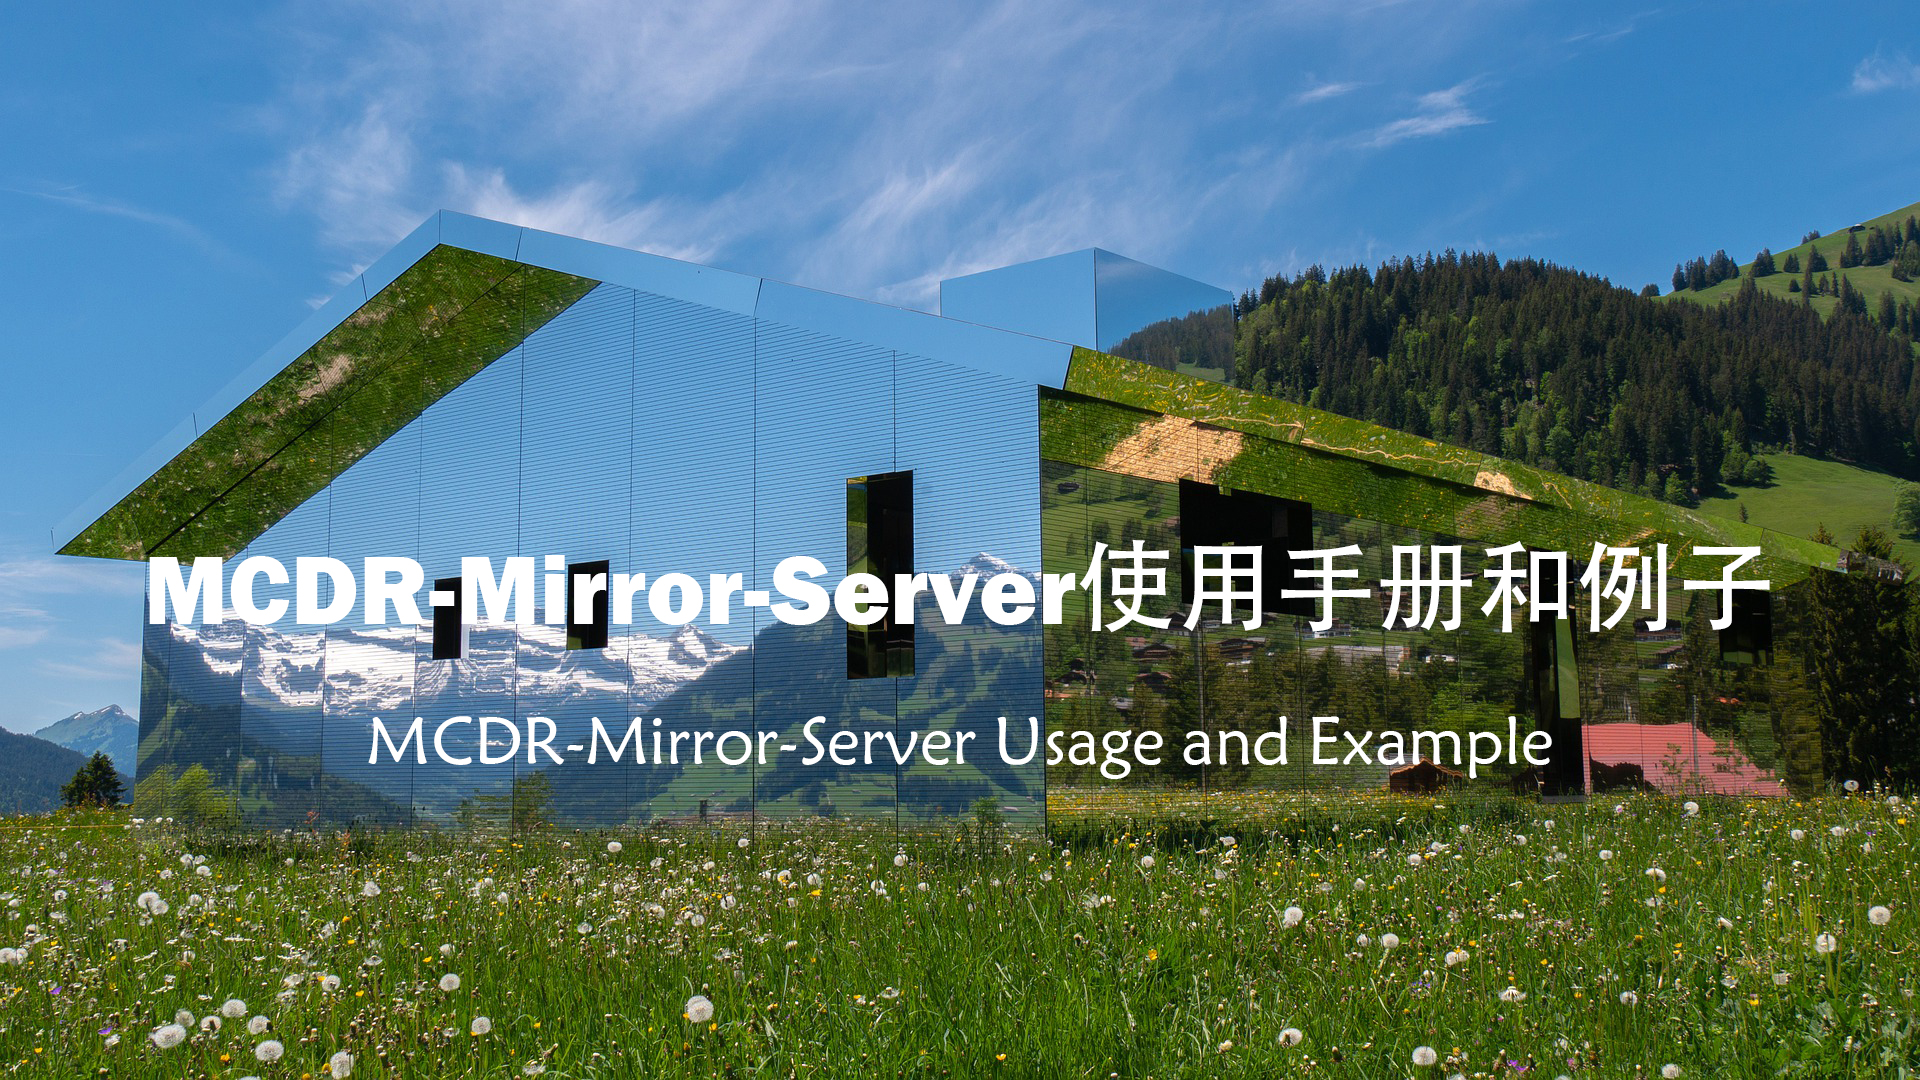 MCDR-Mirror-Server使用手册和例子 | The usage and example of MCDR-Mirror-Server